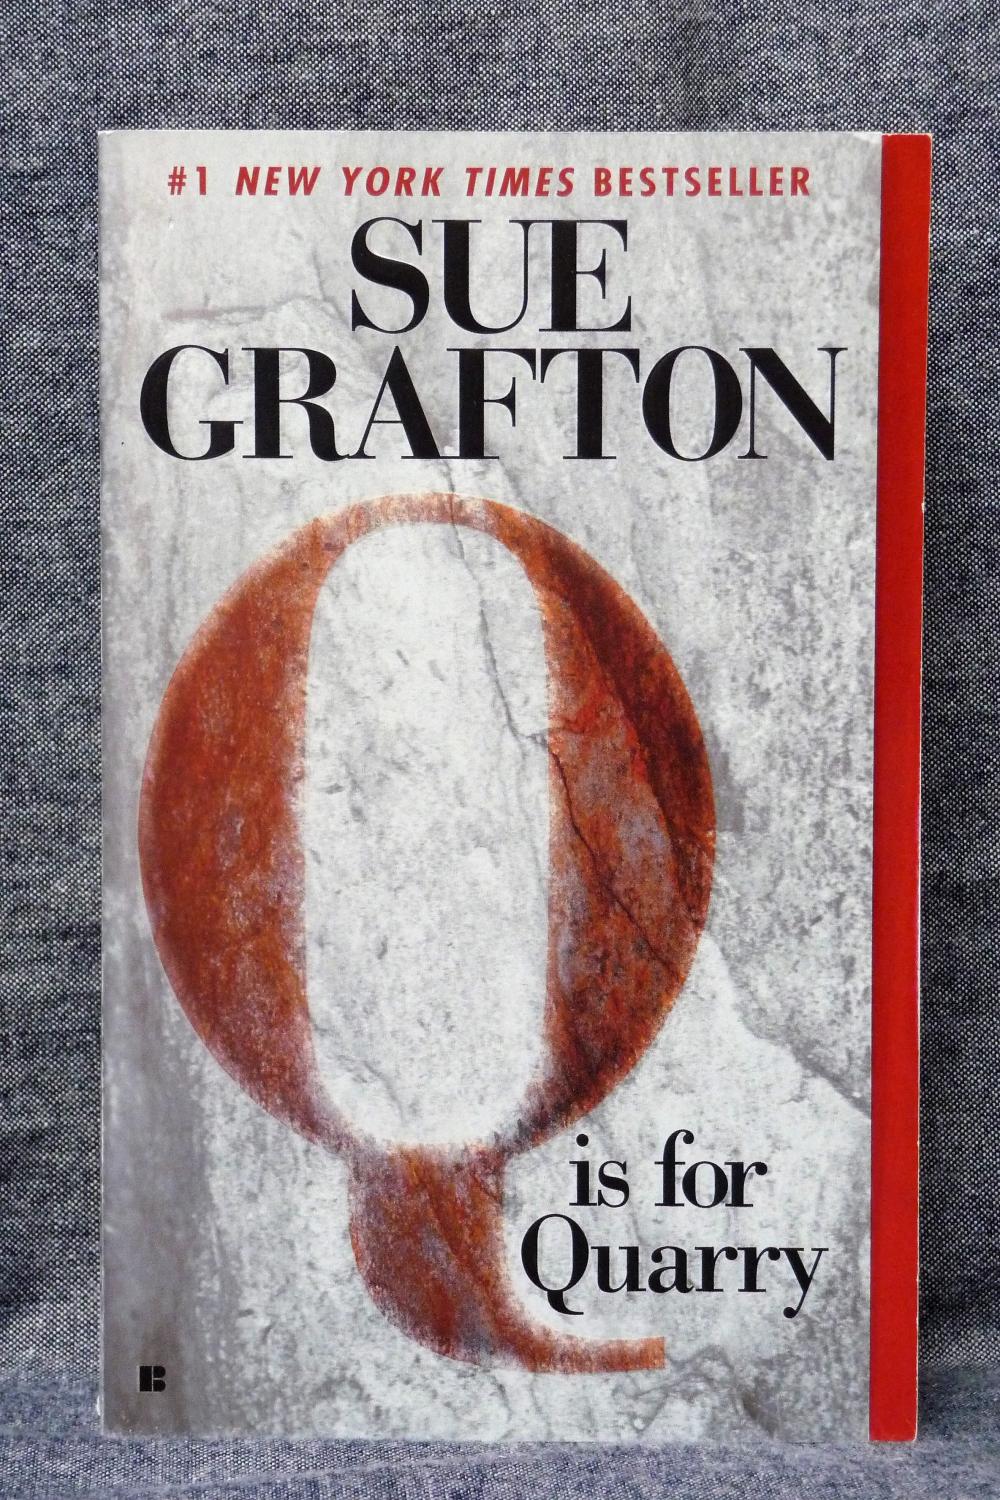 Kinsey Millhone Mystery 17 Q is for Quarry, A - Grafton, Sue